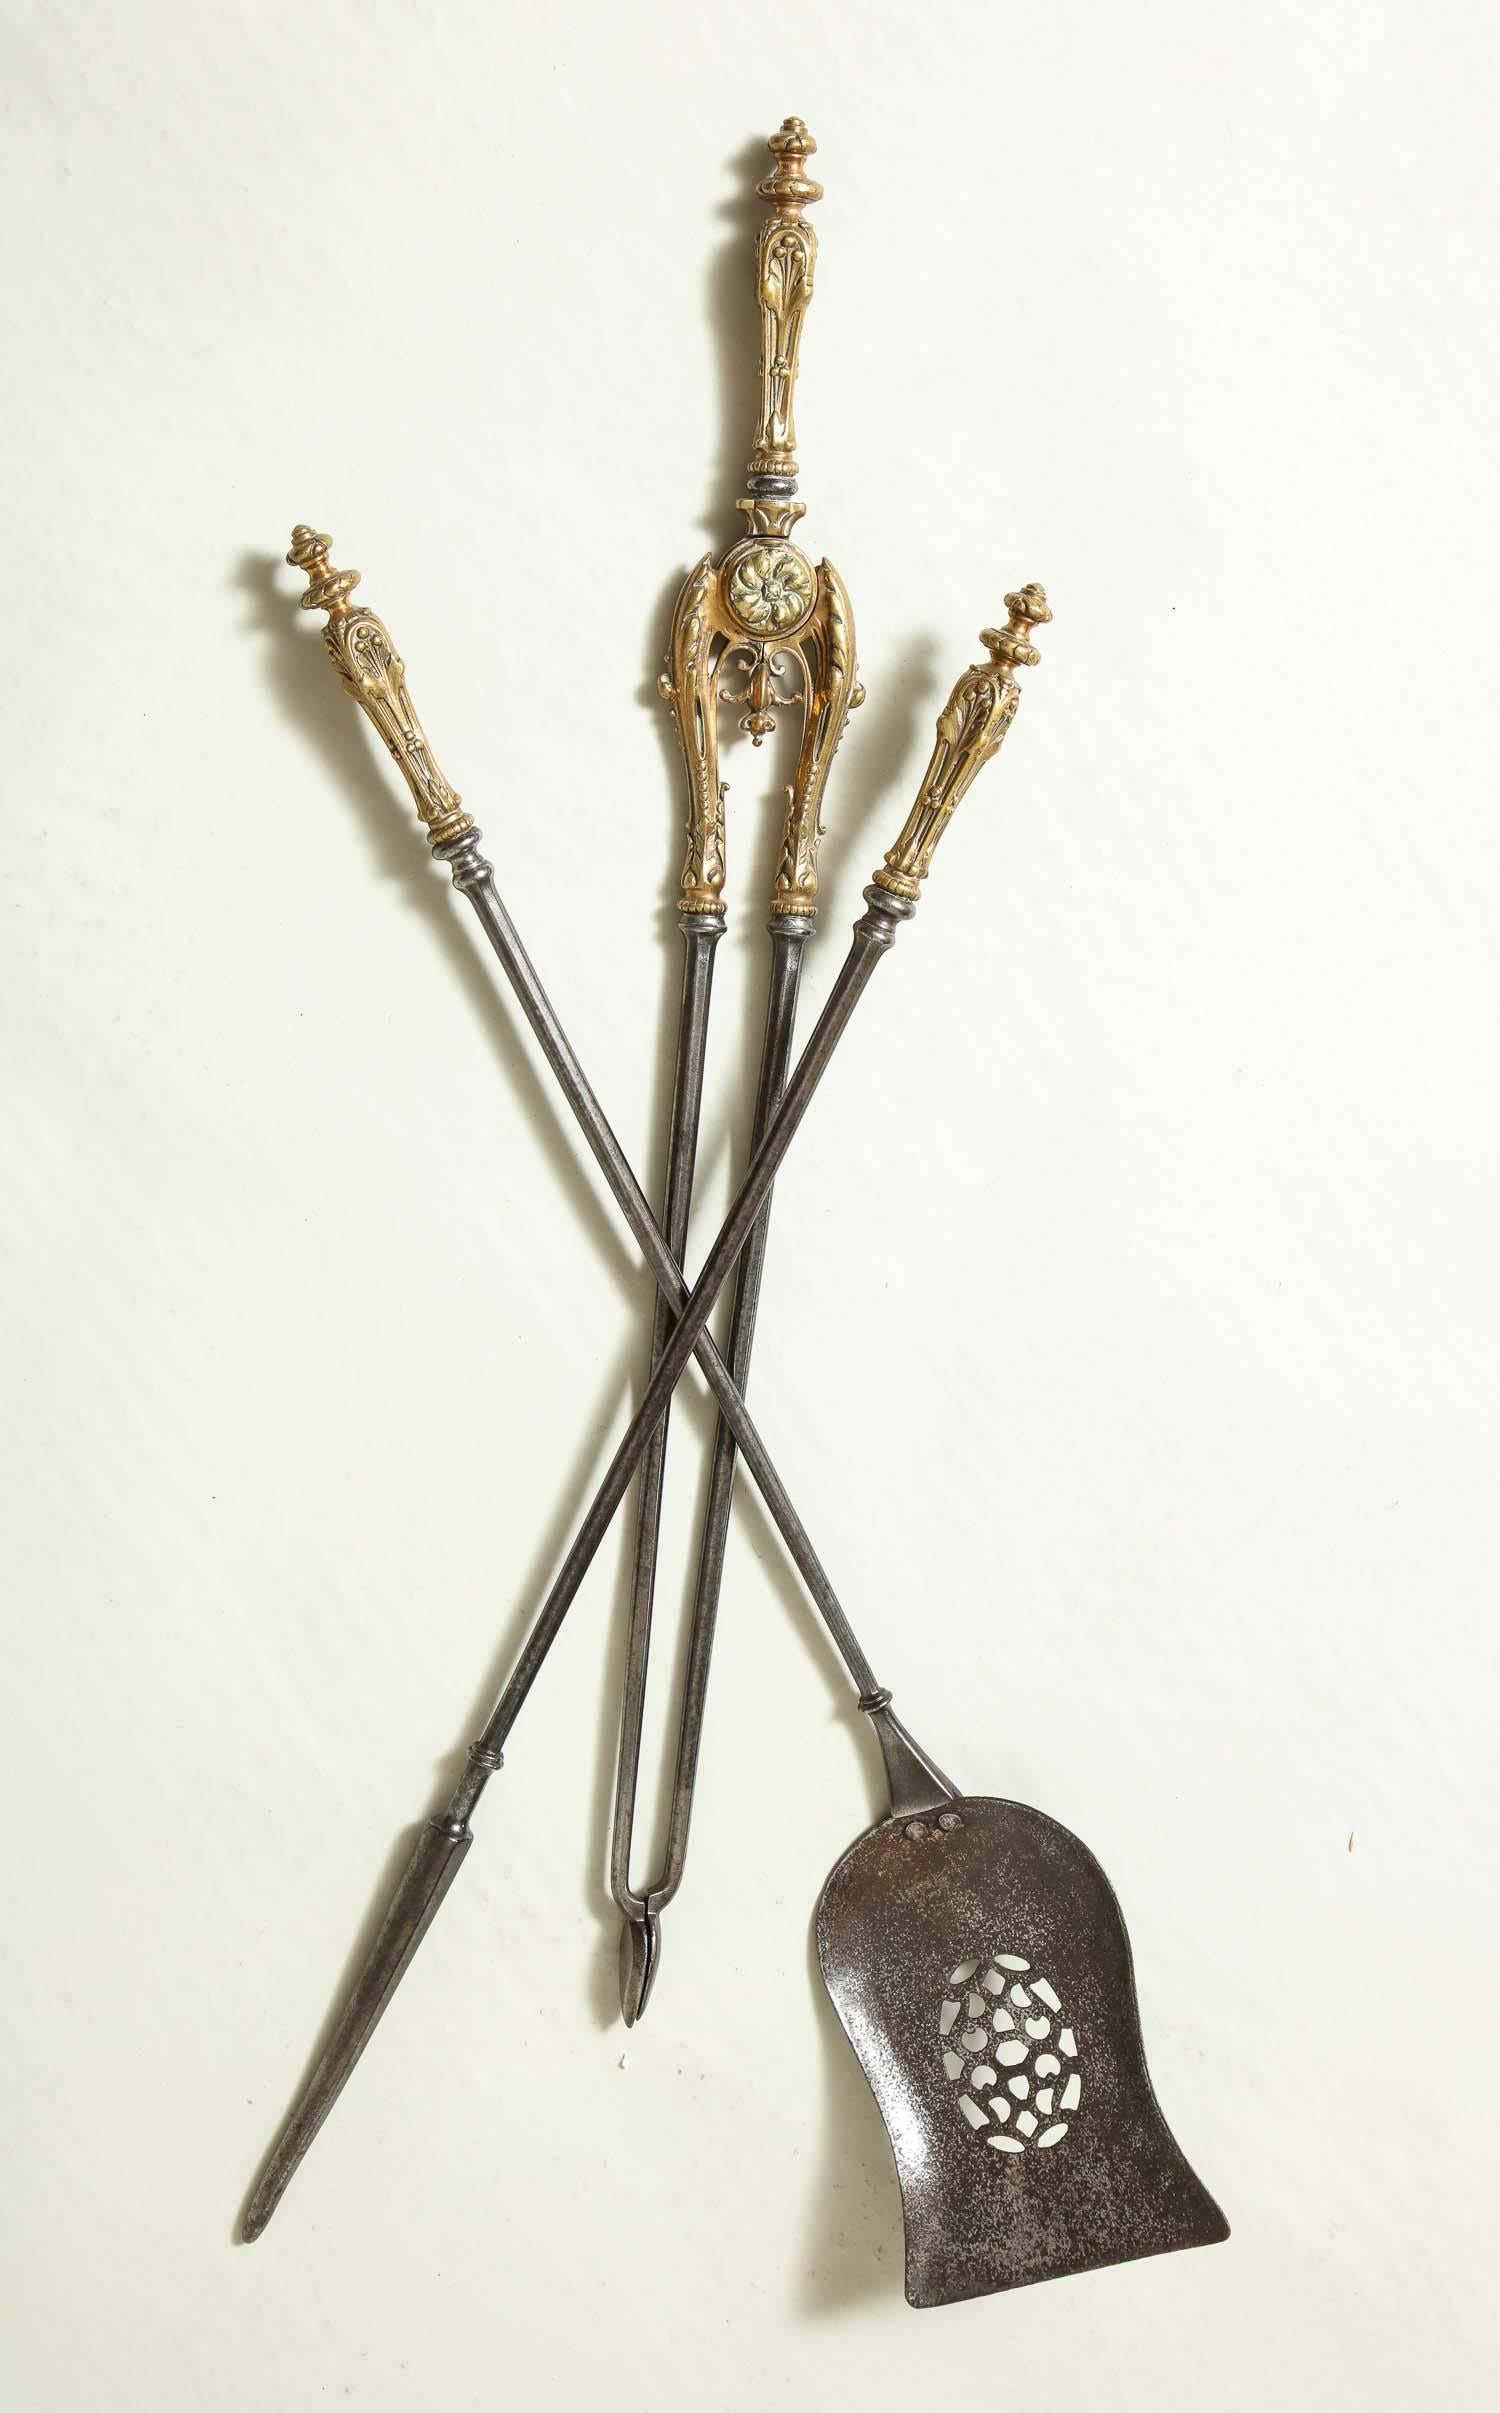 Very fine set of mid-19th century bronze handled steel fire tools, the elaborately cast handles with foliate designs, the shaped dished shovel with oval pierced design, all with nicely patinated surface.